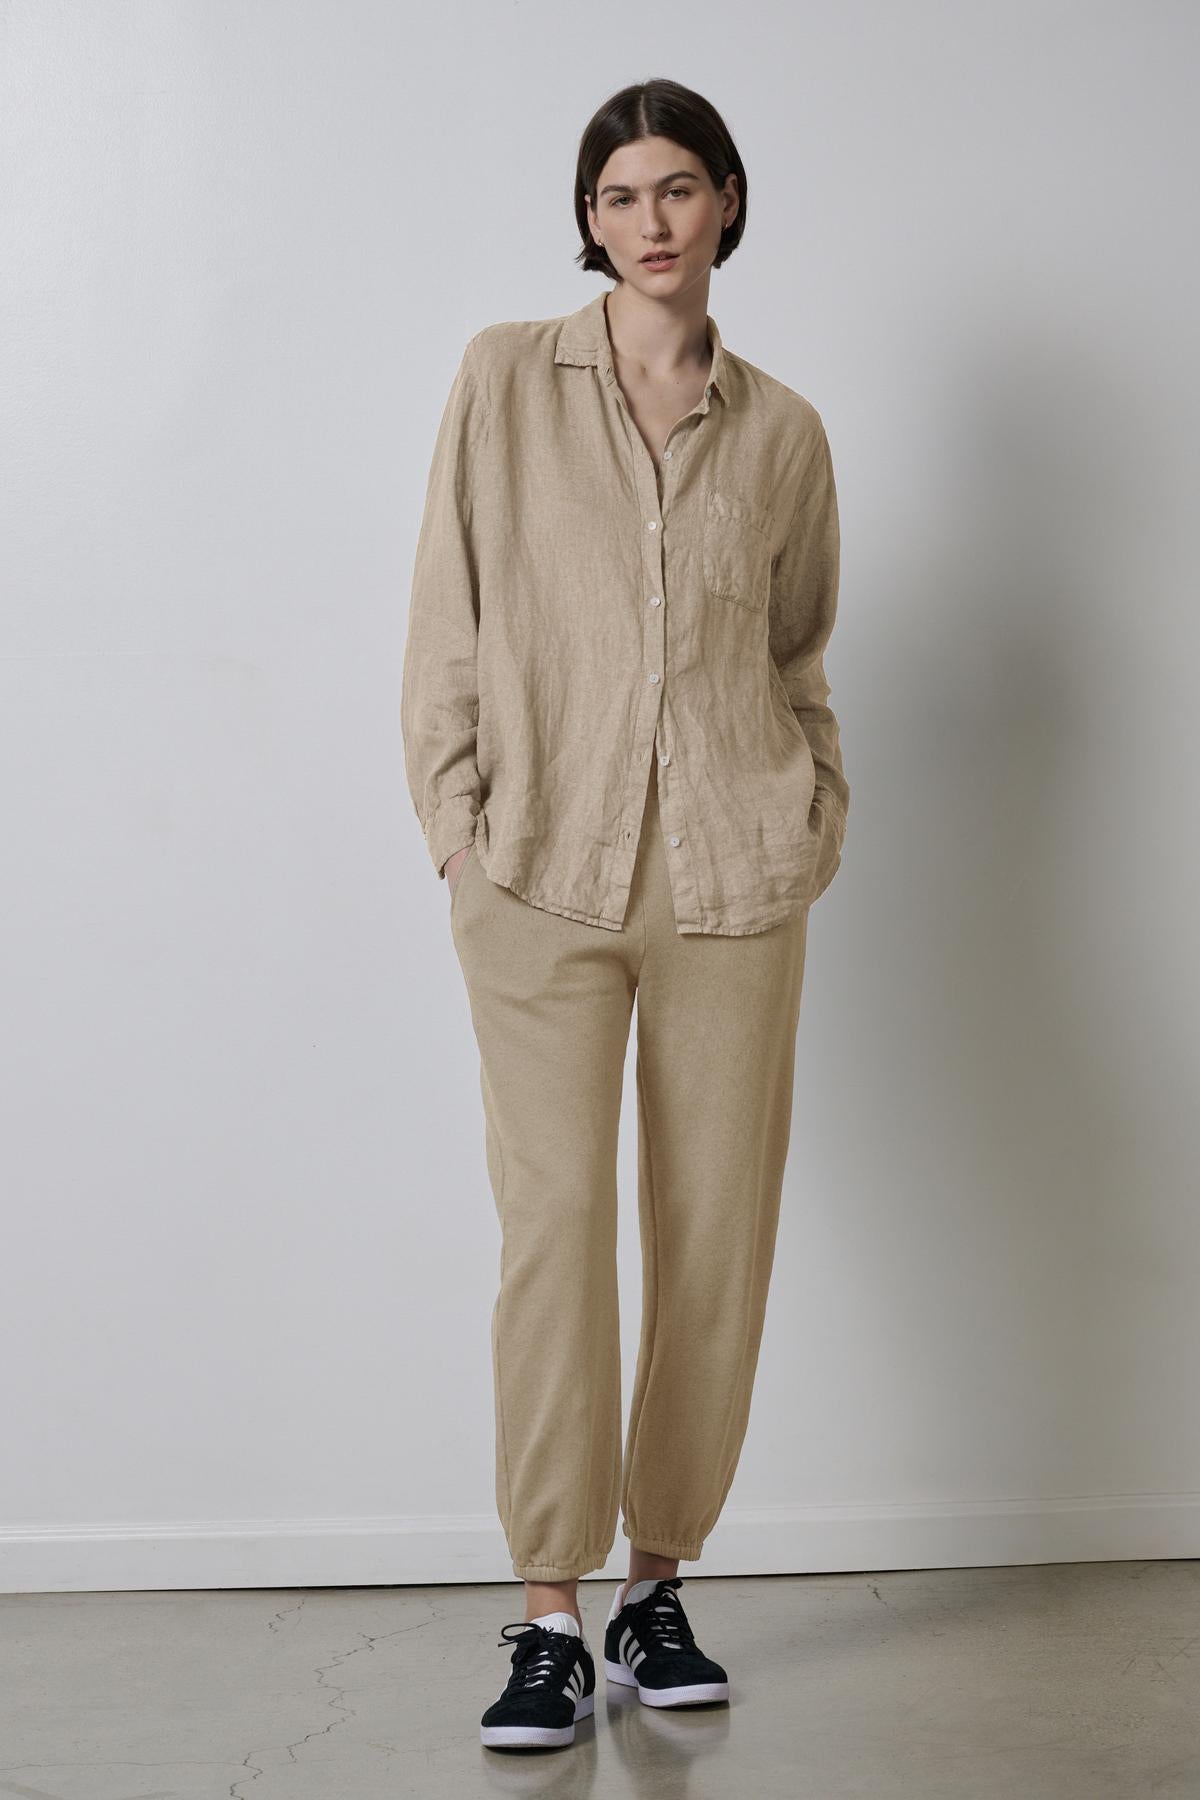   Woman dressed in a casual beige linen shirt and ZUMA SWEATPANT by Velvet by Jenny Graham with black sneakers standing against a plain background. 